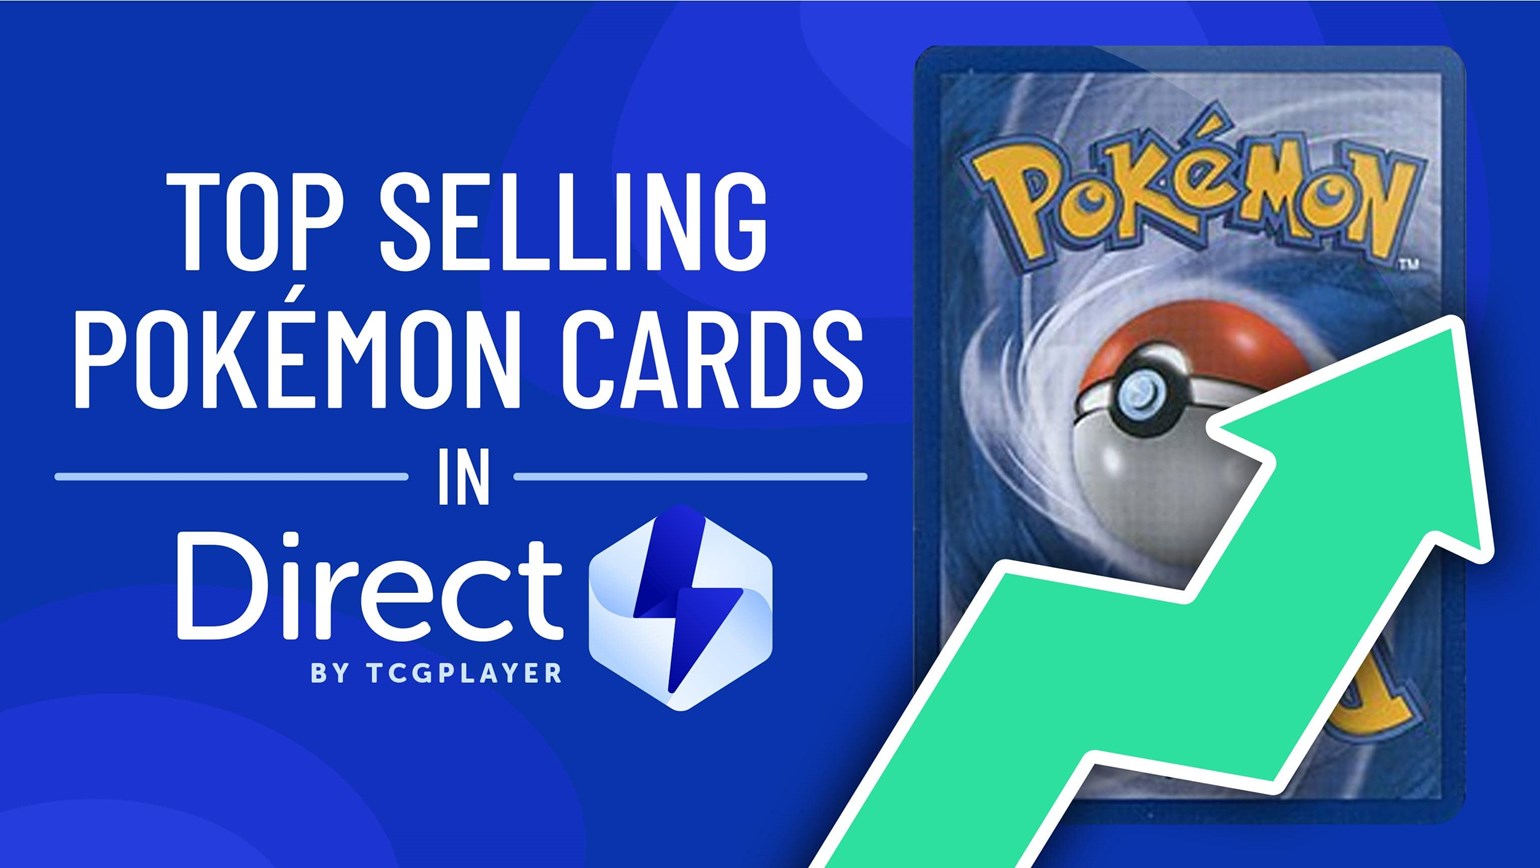 August Top Selling Pokémon Cards Under $25 in Direct by TCGplayer